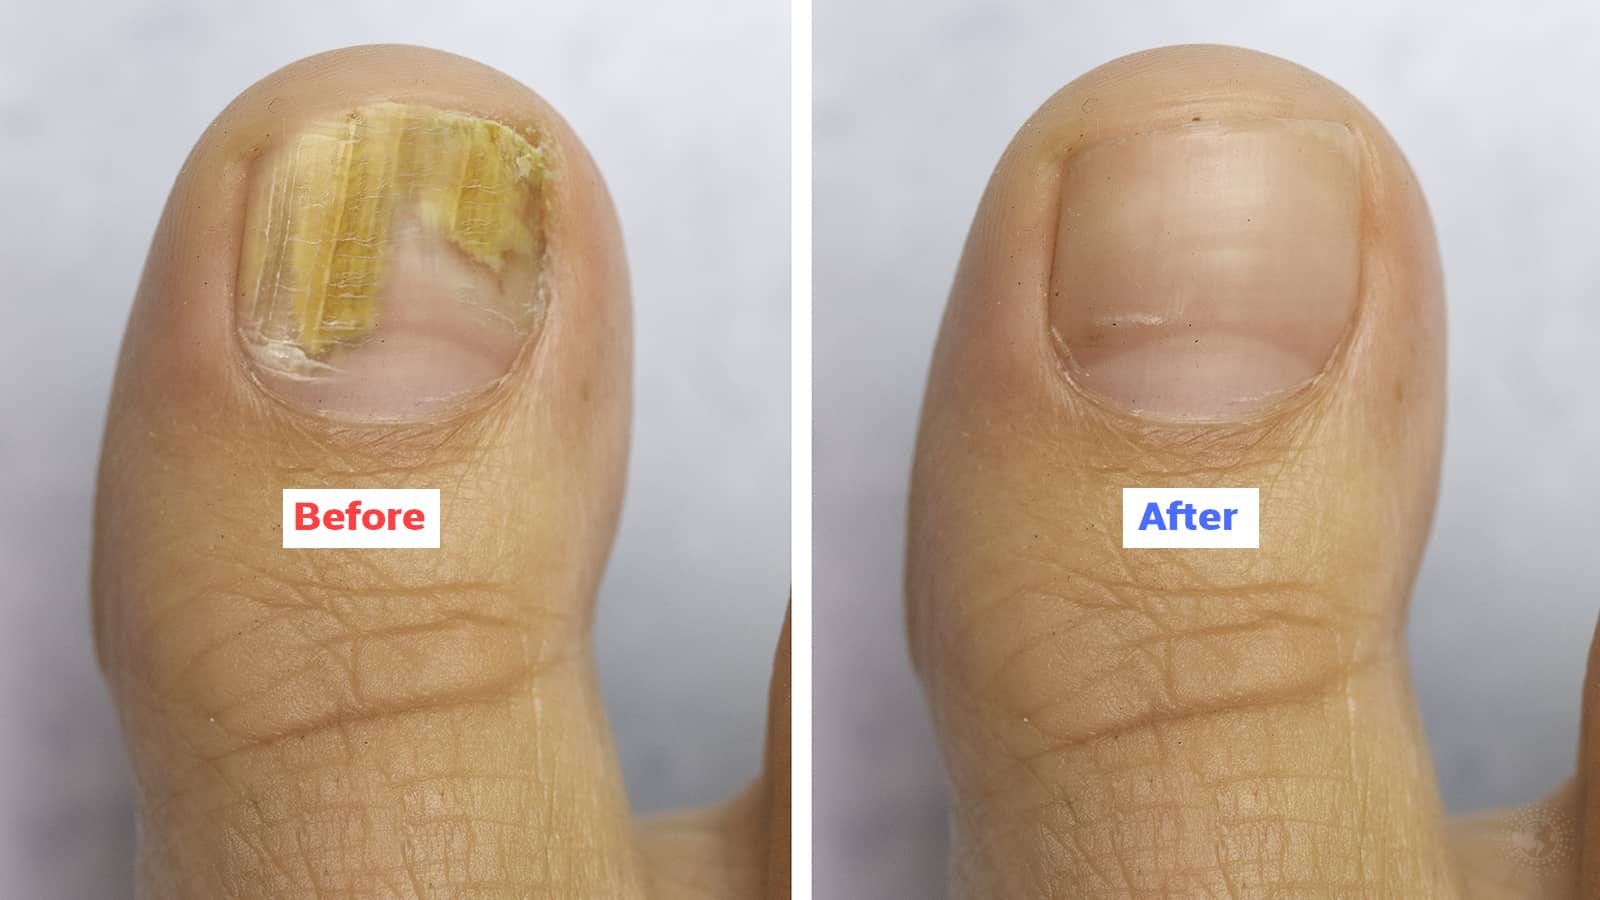 Dermatologists Explain the Cause of Nail Fungus (and How to Fix It)